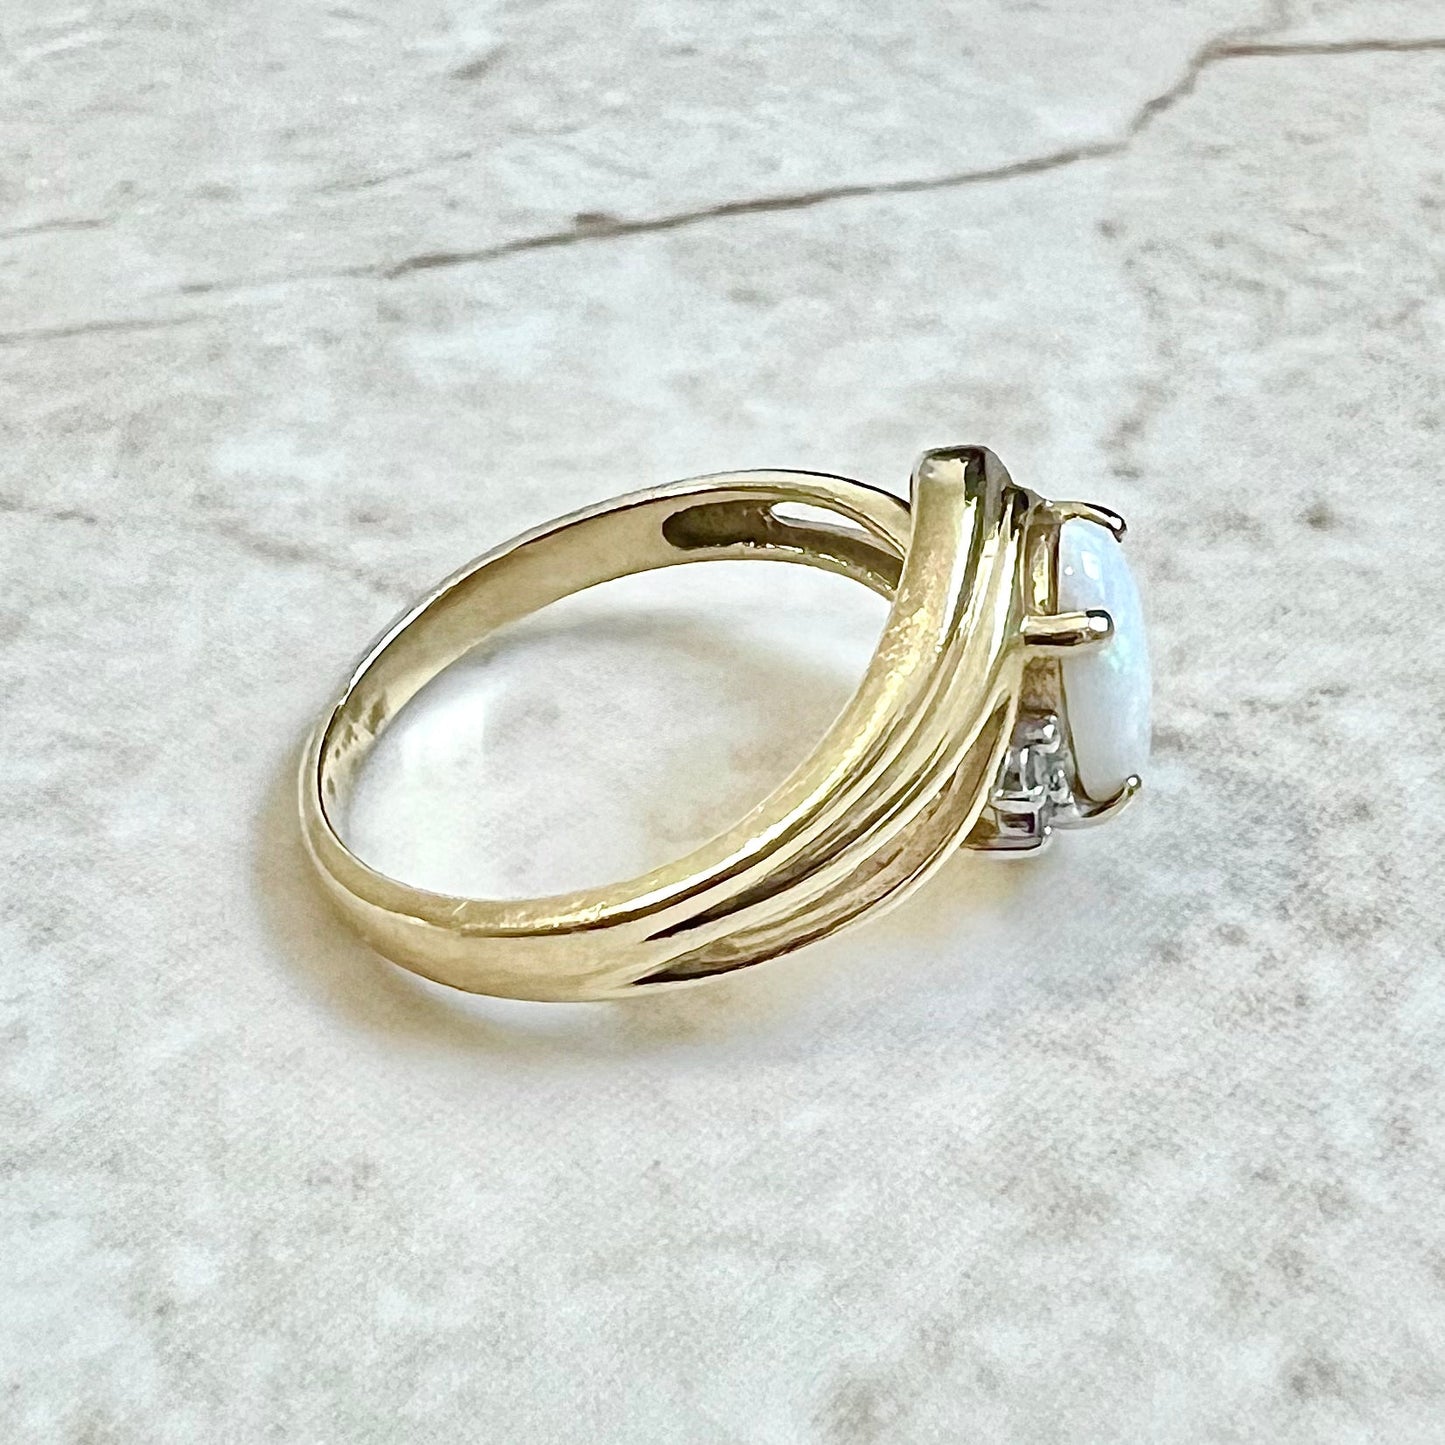 CLEARANCE 40% OFF - Vintage 14 Karat Yellow Gold Natural Opal & Diamond Cocktail Ring